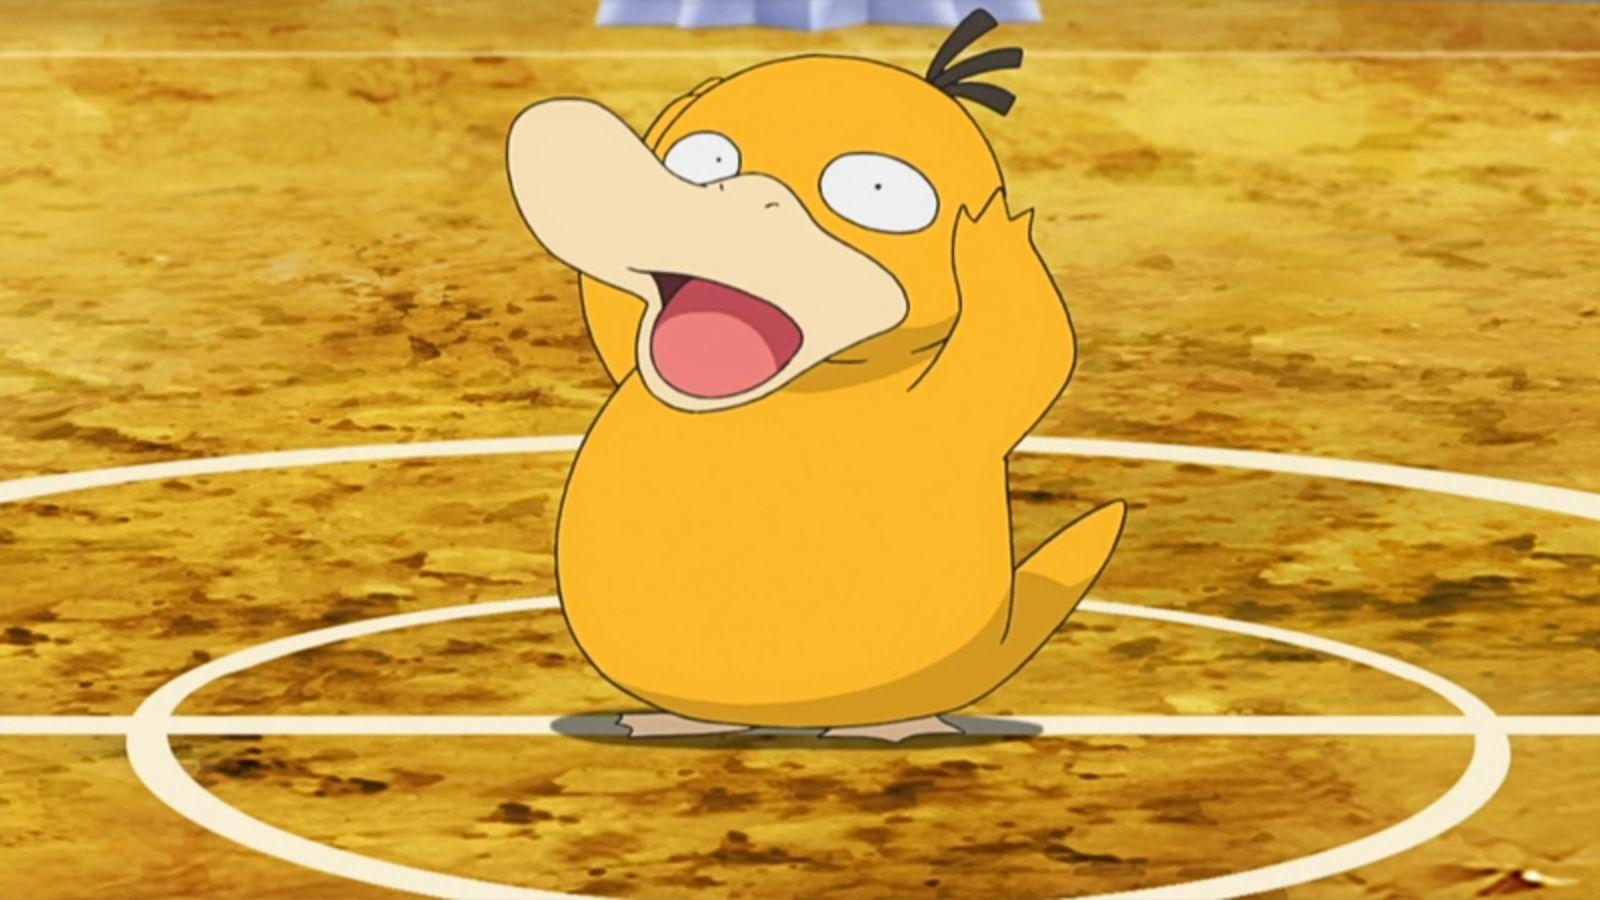 Psyduck from Pokemon anime.